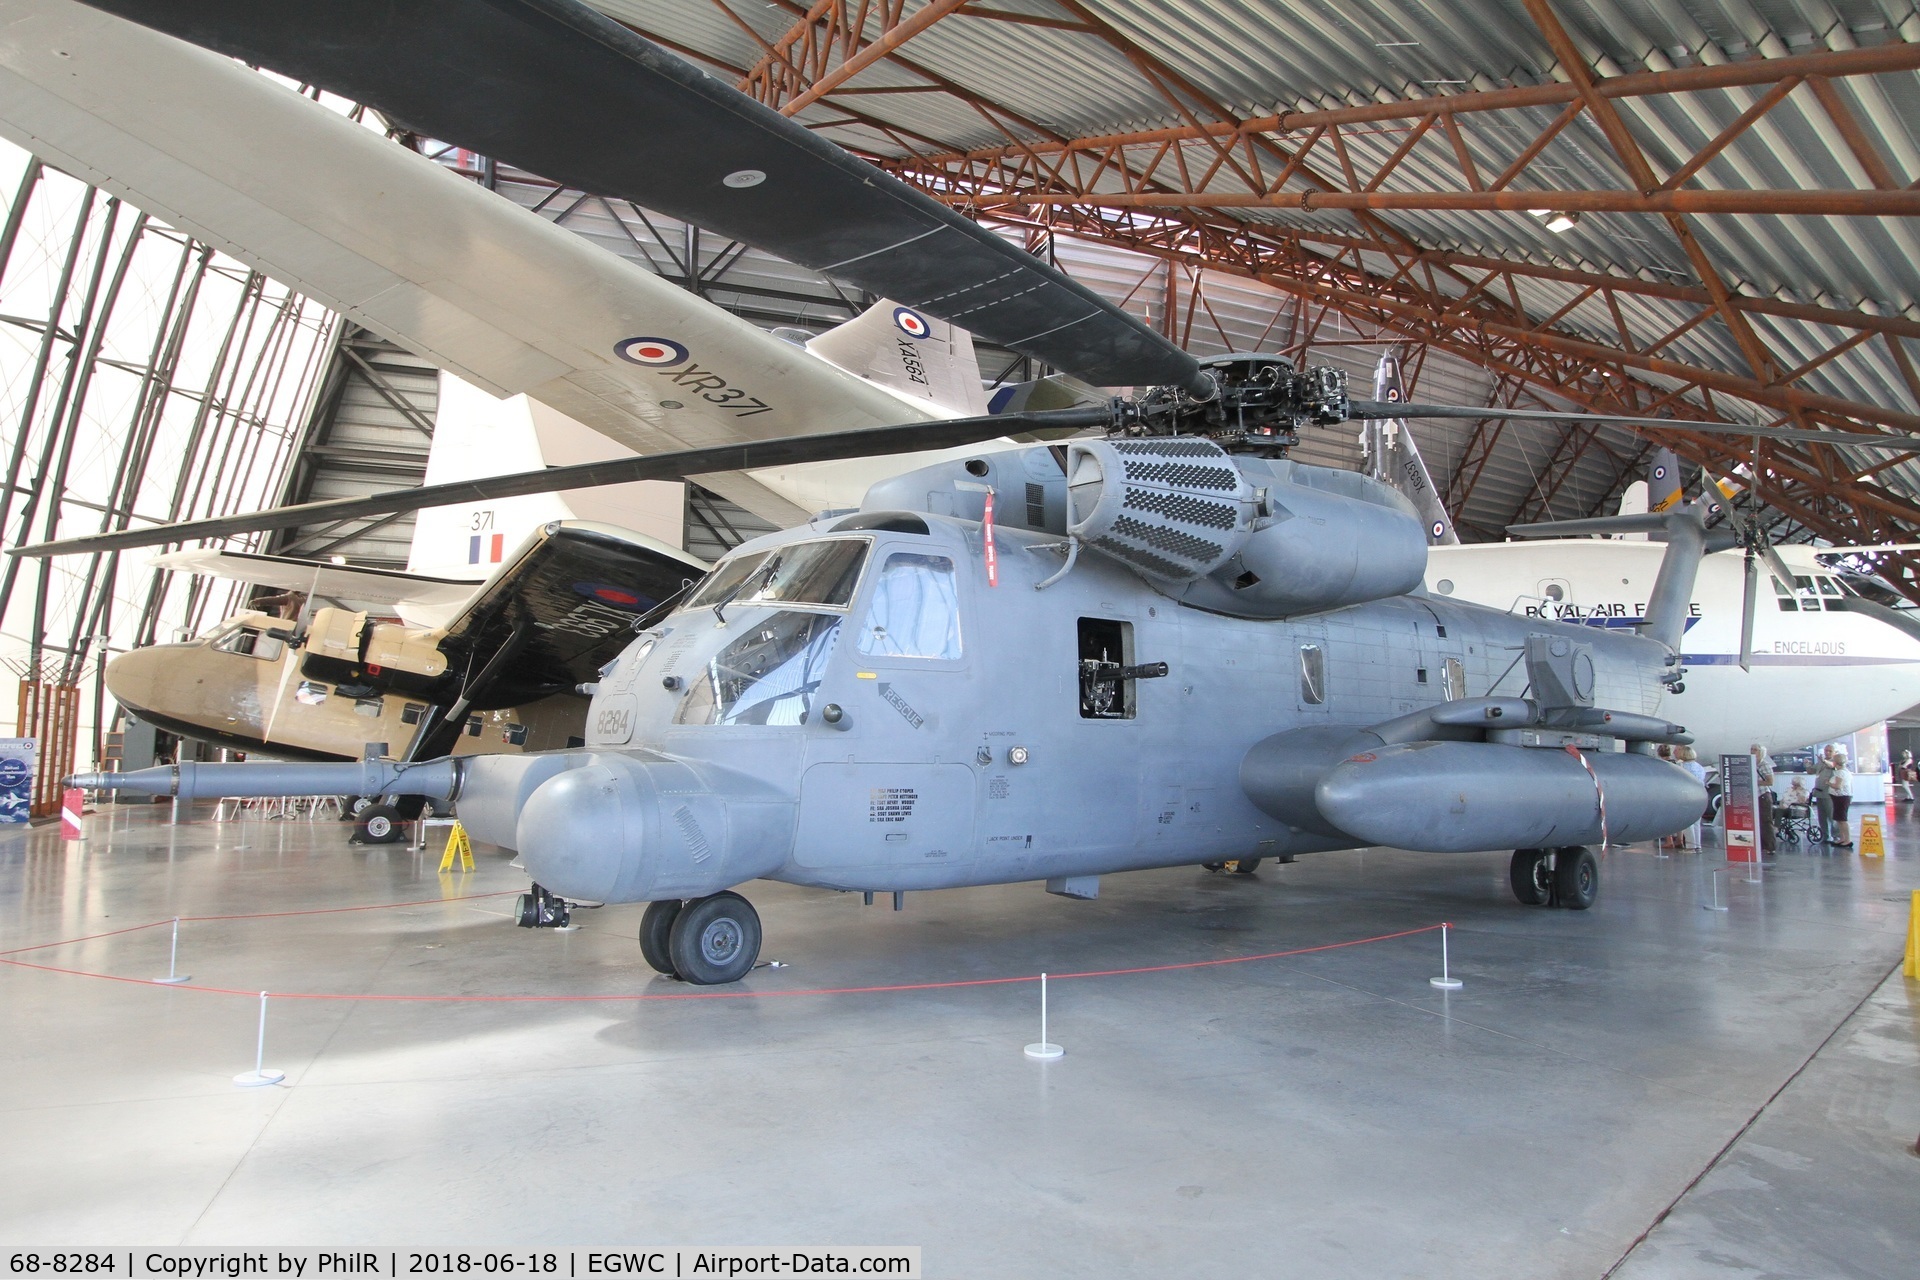 68-8284, 1968 Sikorsky MH-53M Pave Low IV C/N 65-131, 68-8284 Sikorsky MH-53M Pave Low lV USAF Cosford